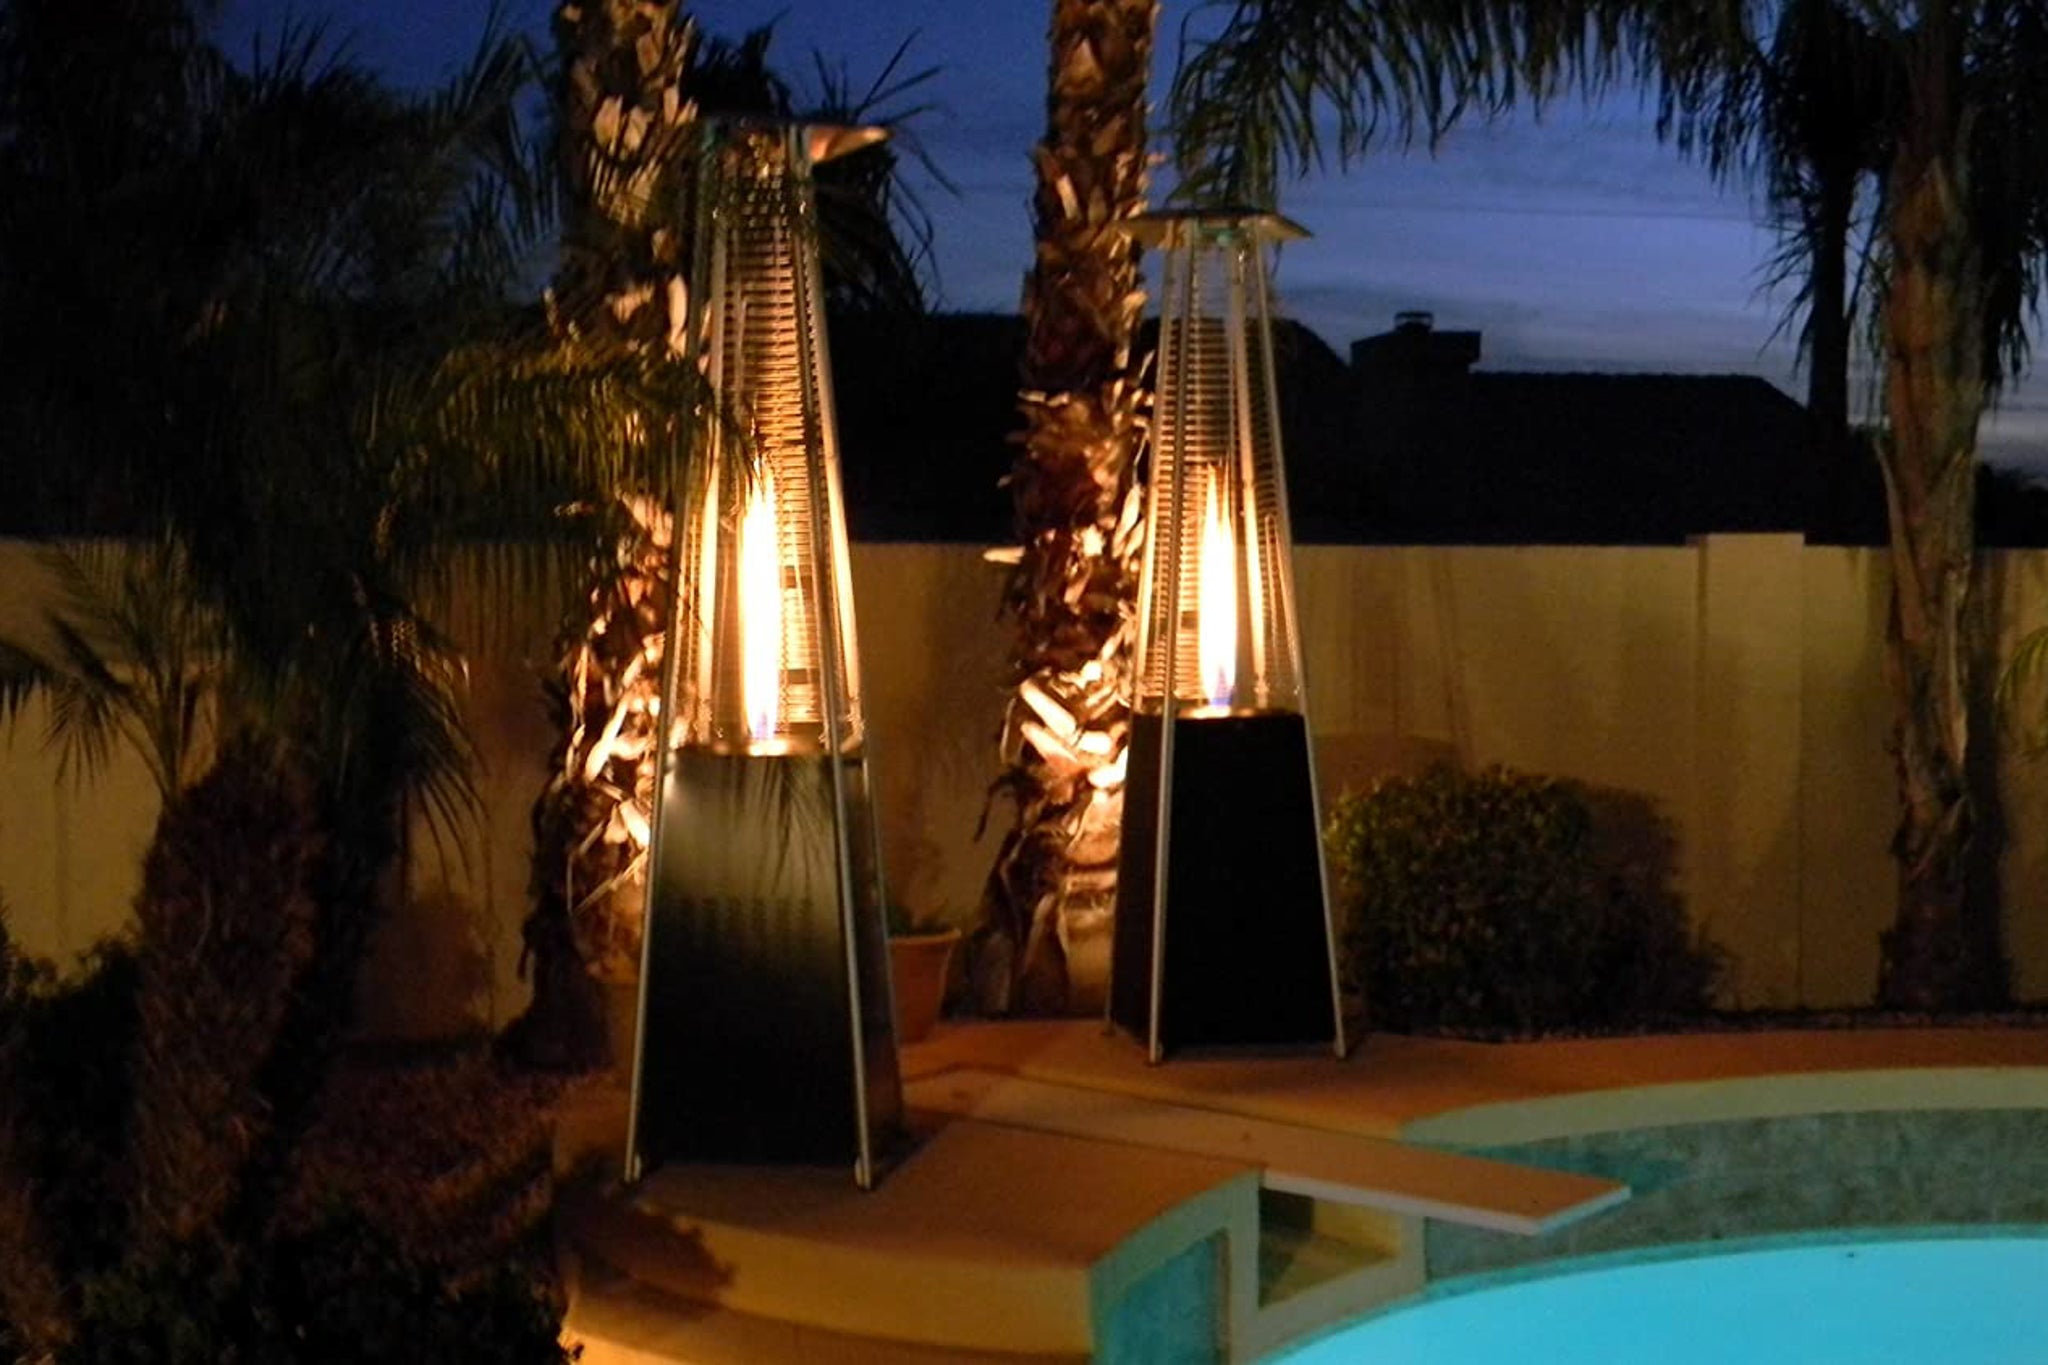 Electric outdoor heater